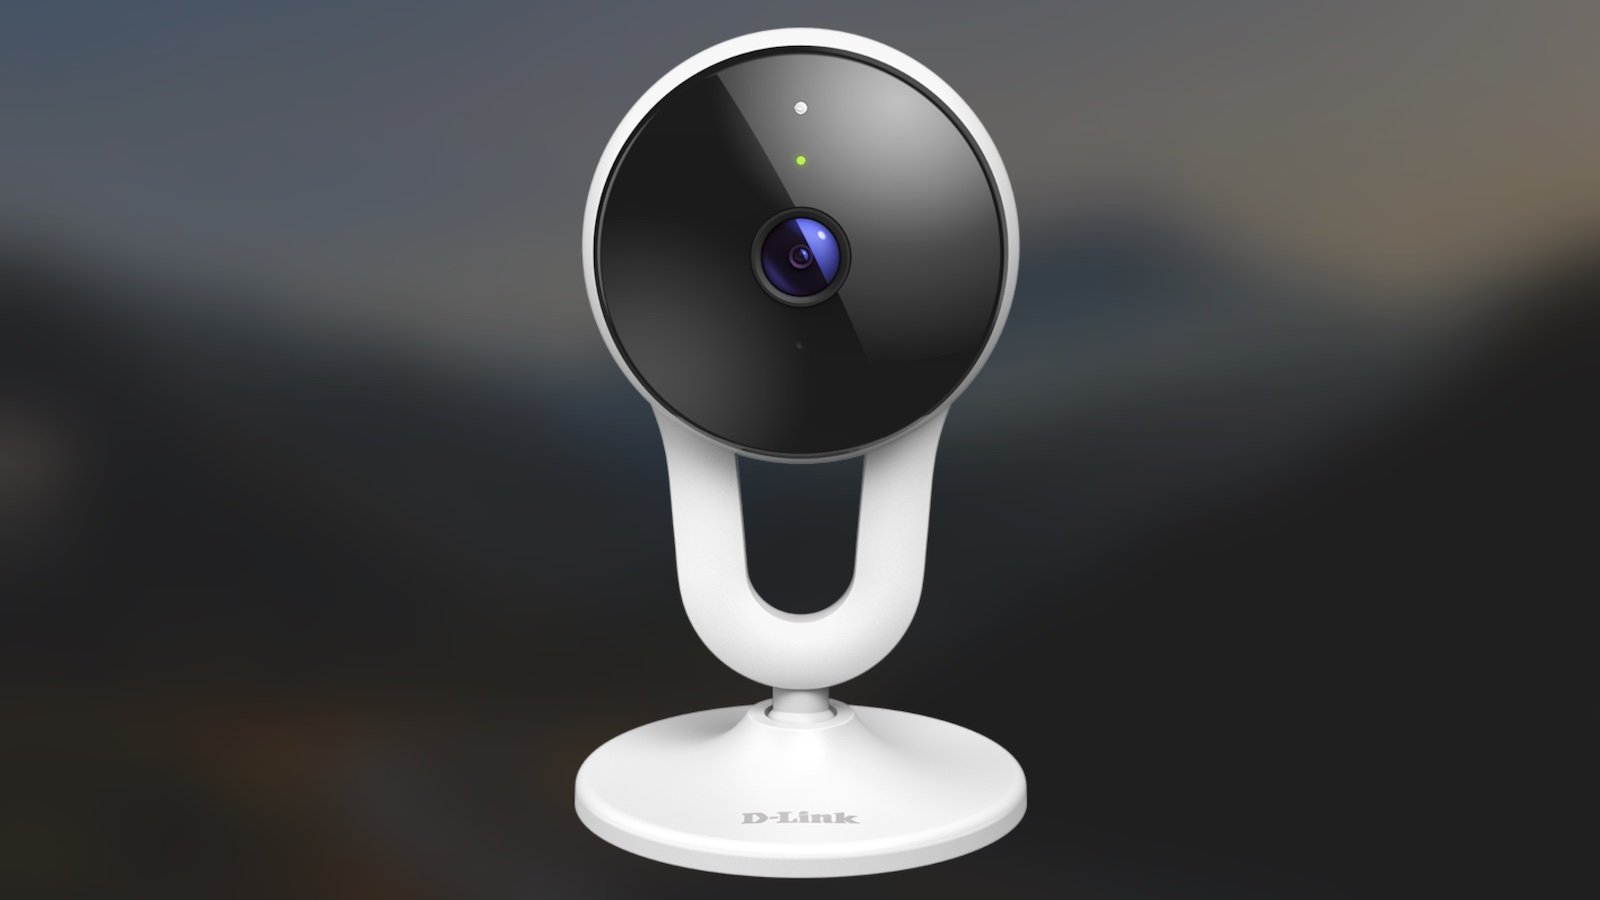 D-Link Full HD Wi-Fi Camera offers home security with AI-based person detection